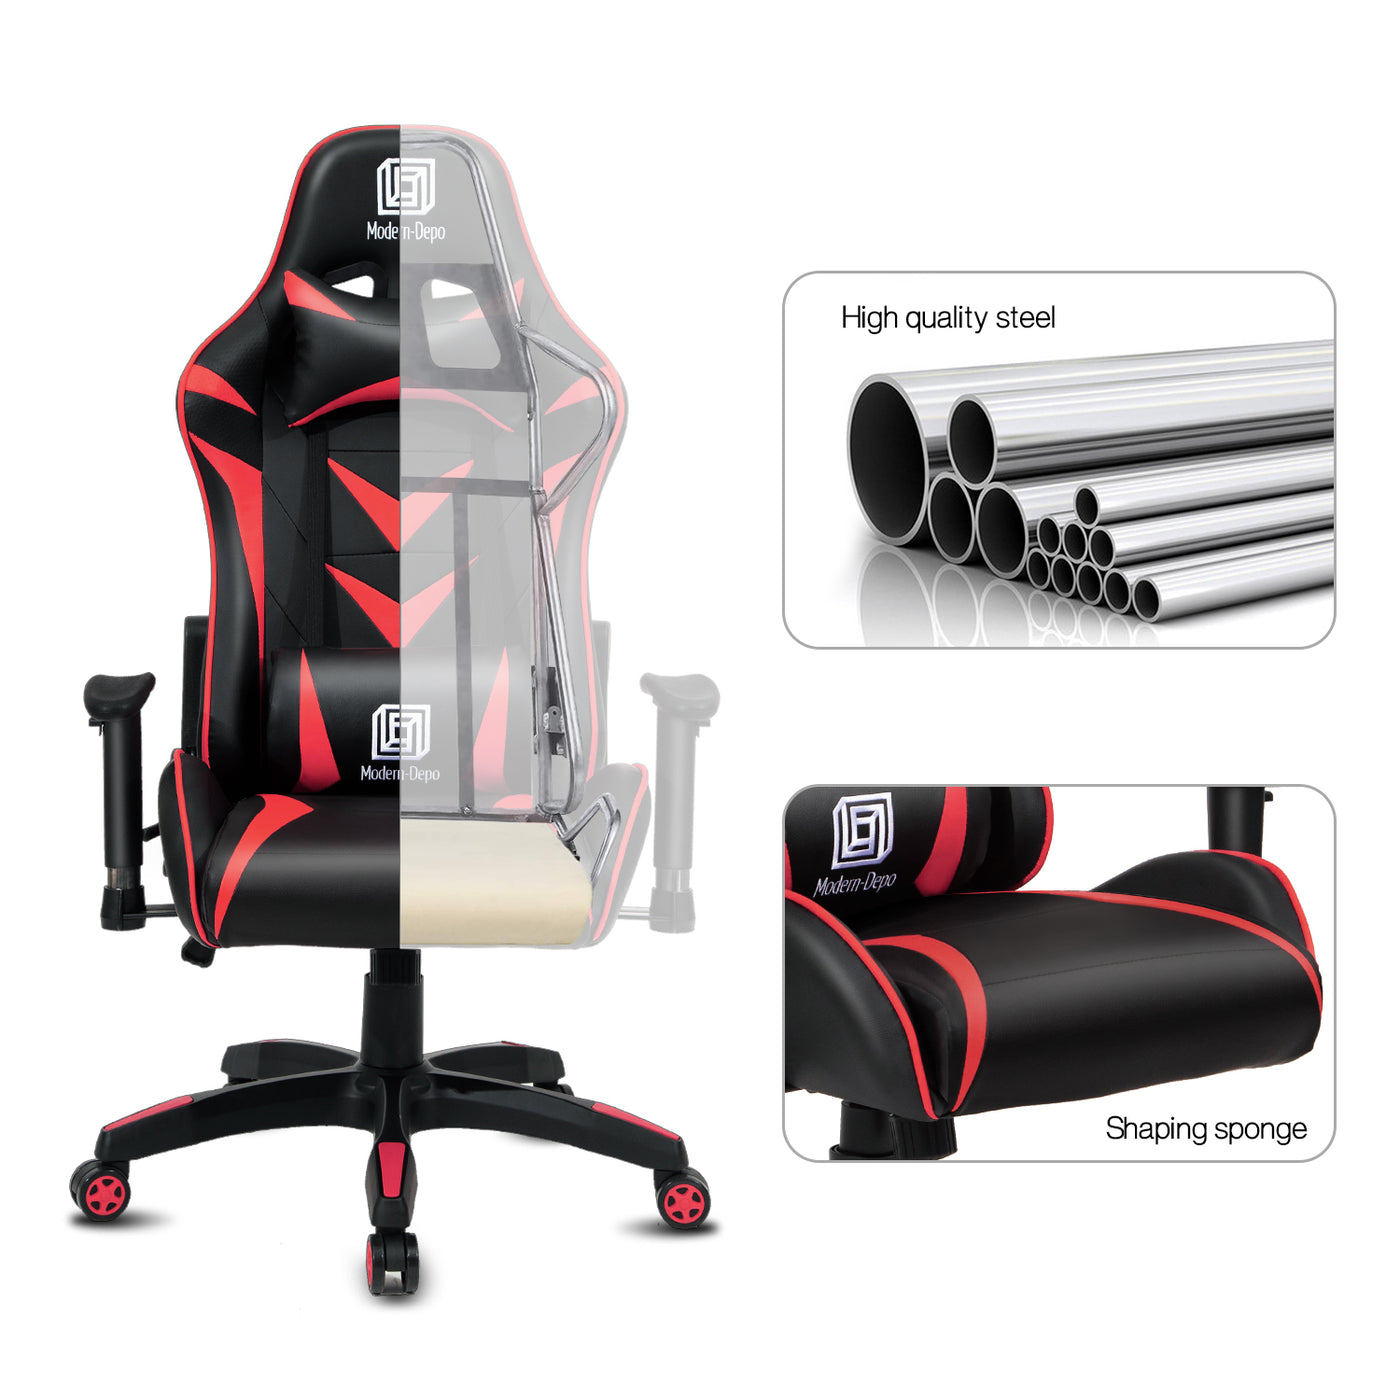 Computer Gaming Chair Bluetooth Speakers Ergonomic Office Chairs Swivel Recliner